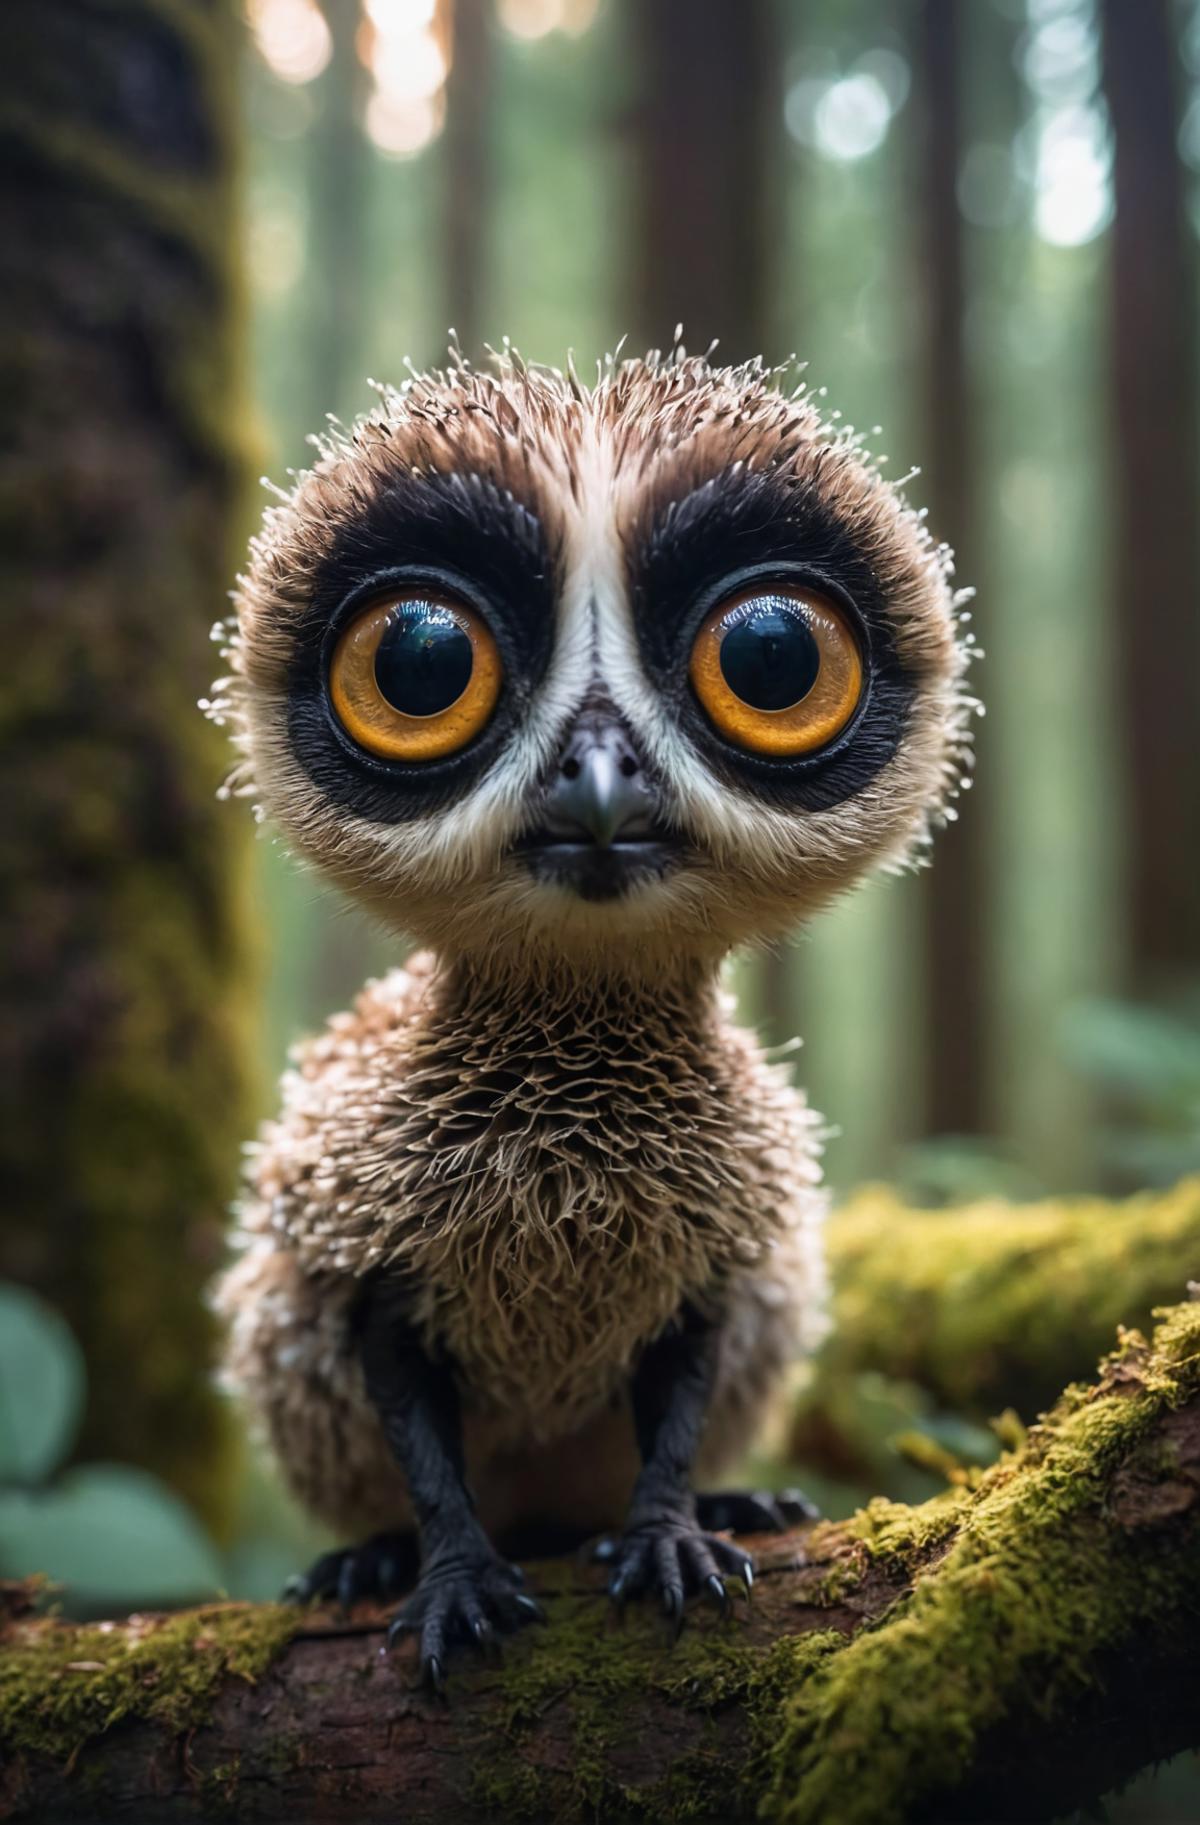 A baby owl with big eyes standing on a tree branch.